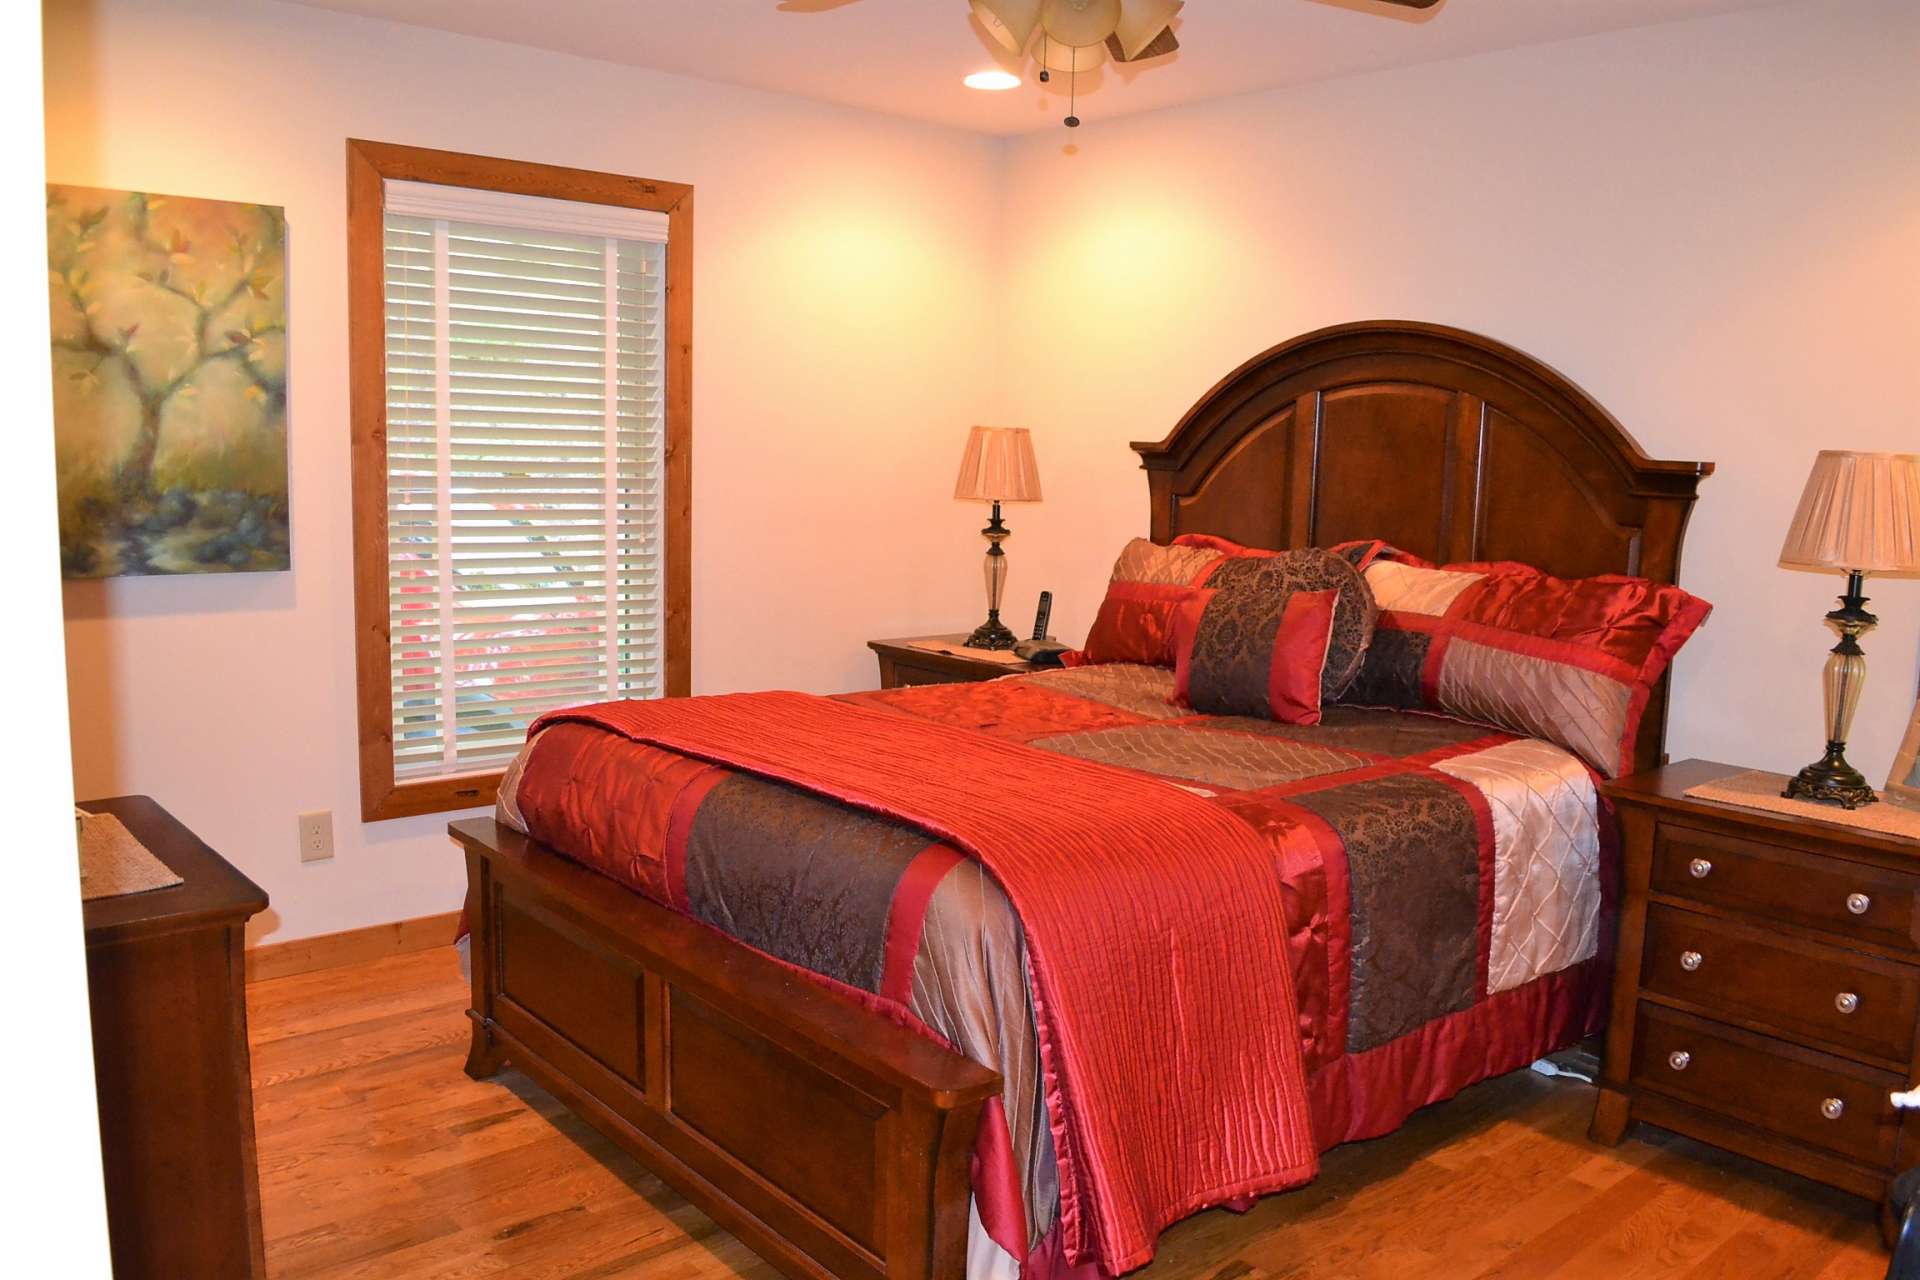 Main level living offers the master suite with private bath, guest bedroom, guest bath and laundry area on the main level.